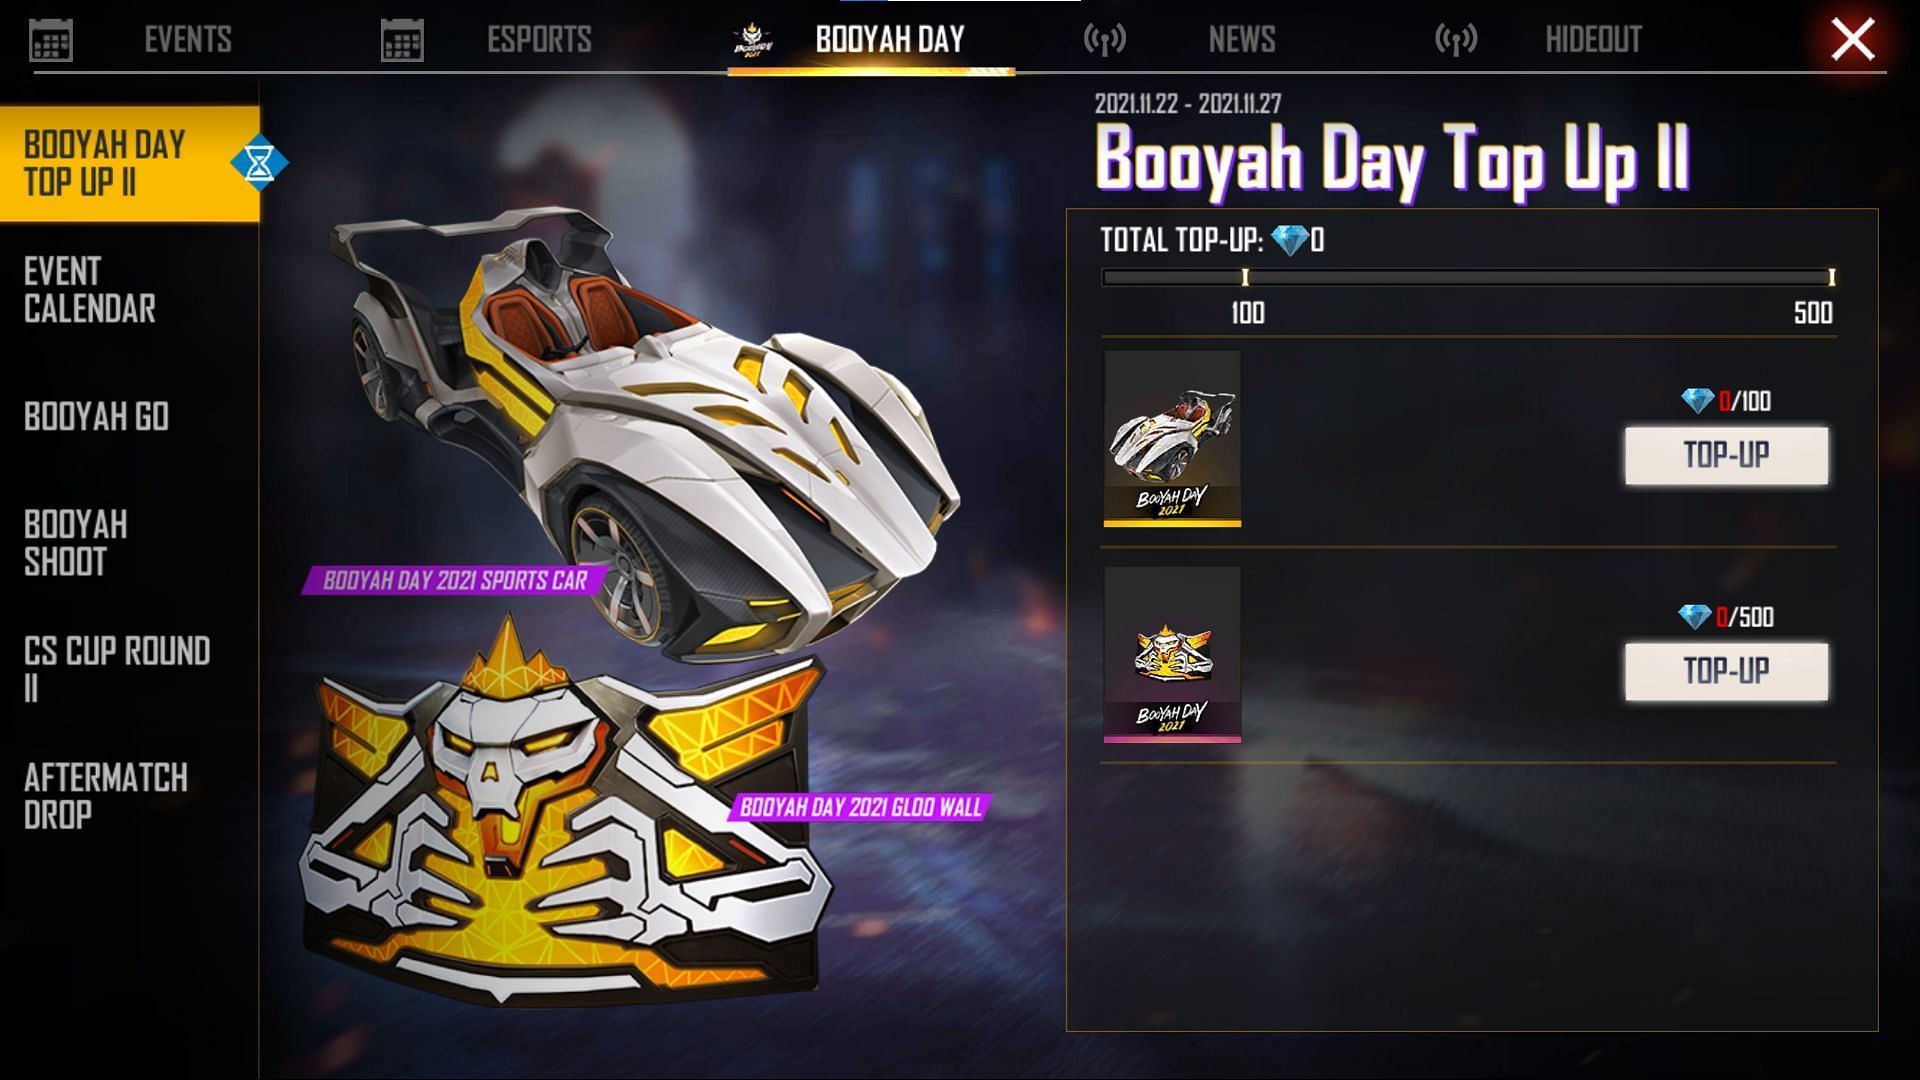 Booyah Day Top Up 2 started on 22 November (Image via Free Fire)